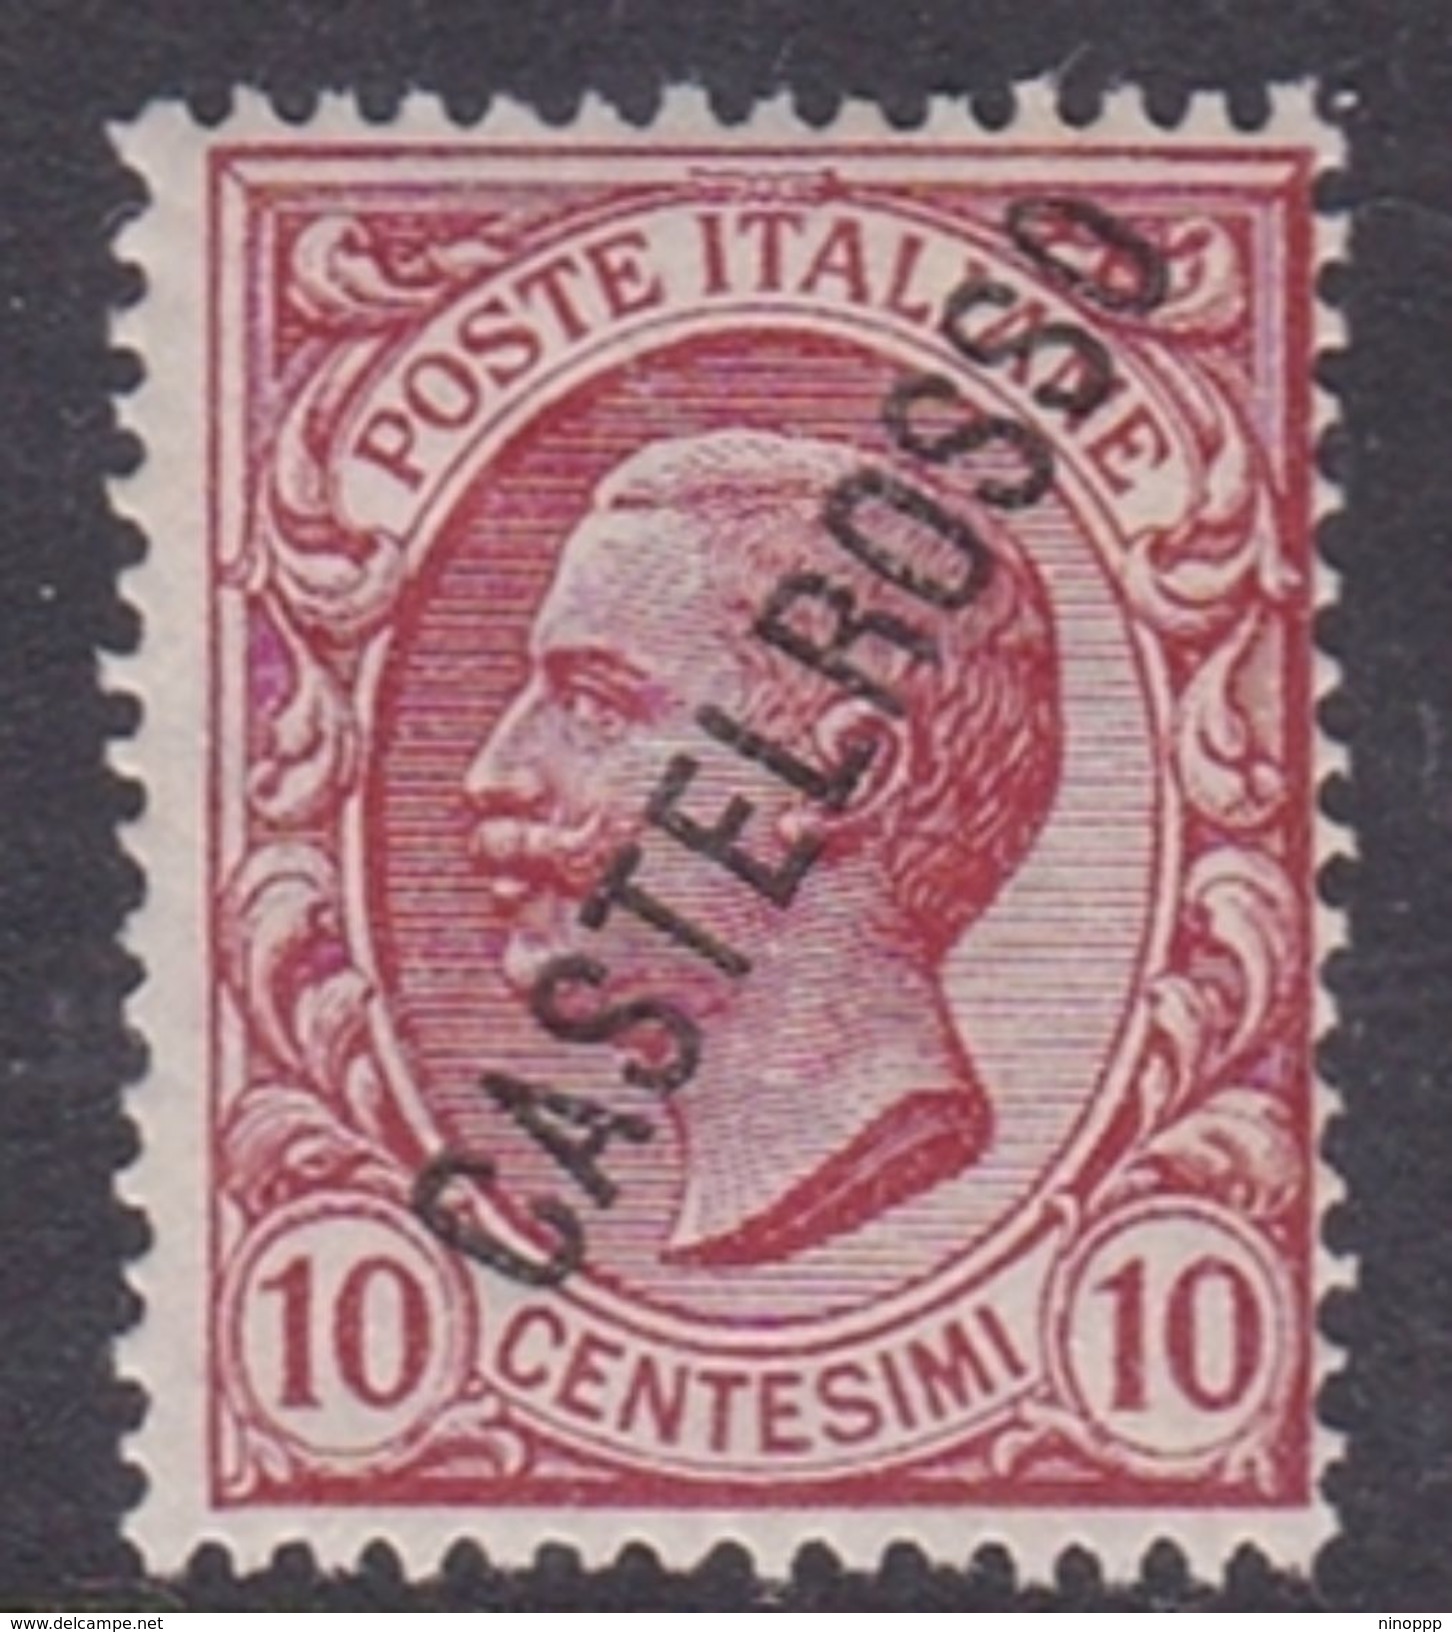 Italy-Colonies And Territories-Castelrosso S16 1924 10c Rose MNH - Algemene Uitgaven